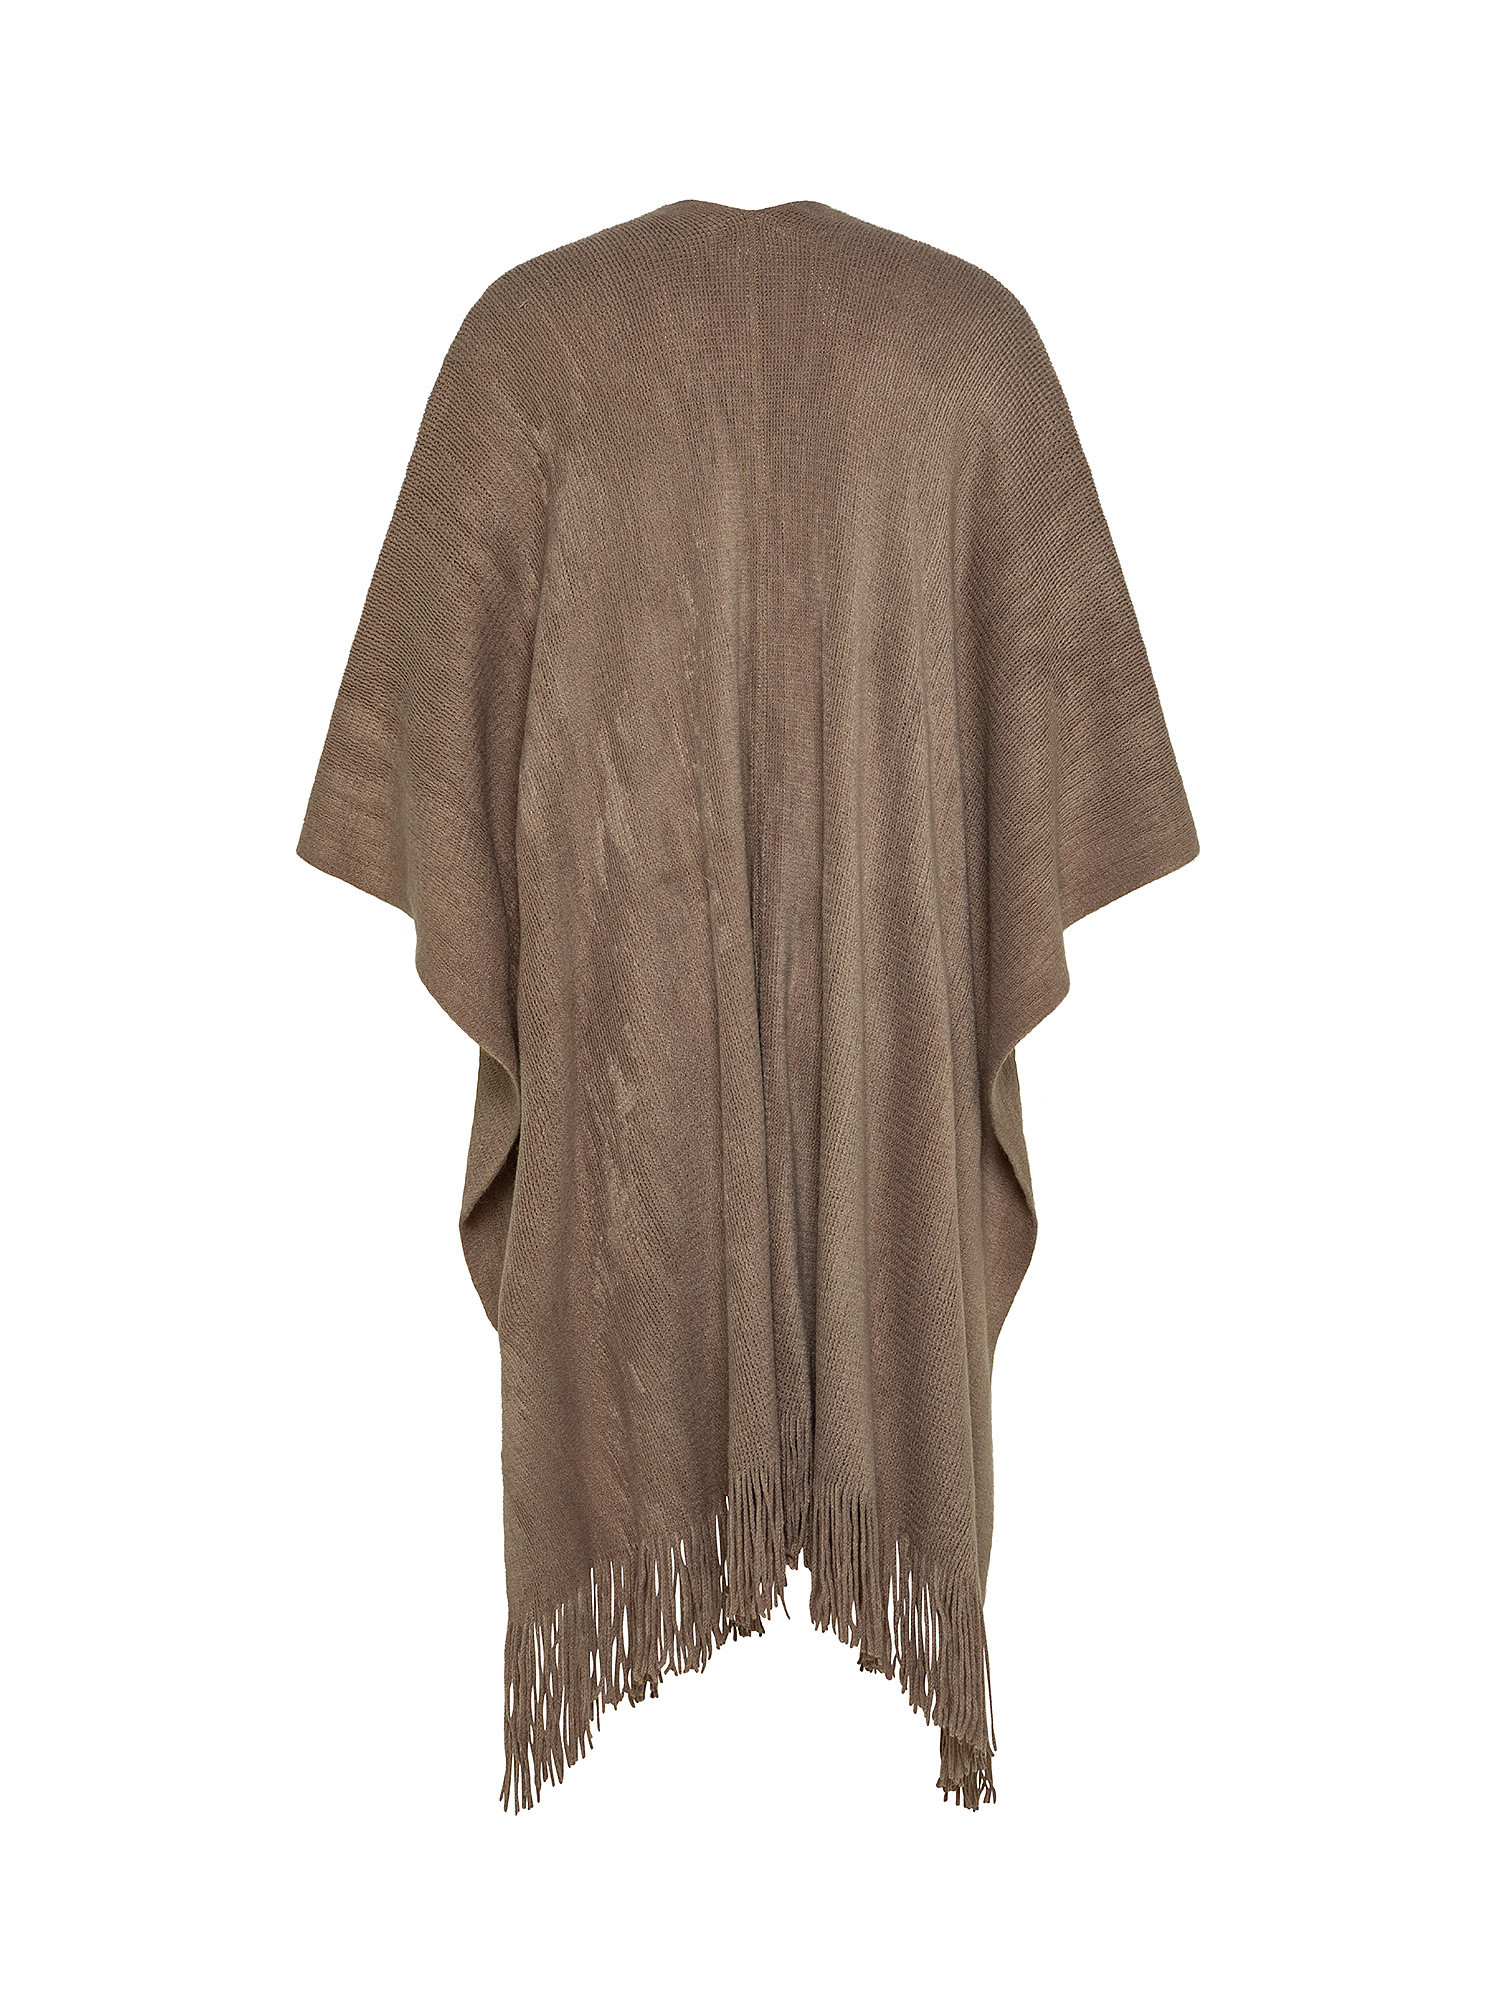 Cape with fringes, Brown, large image number 1